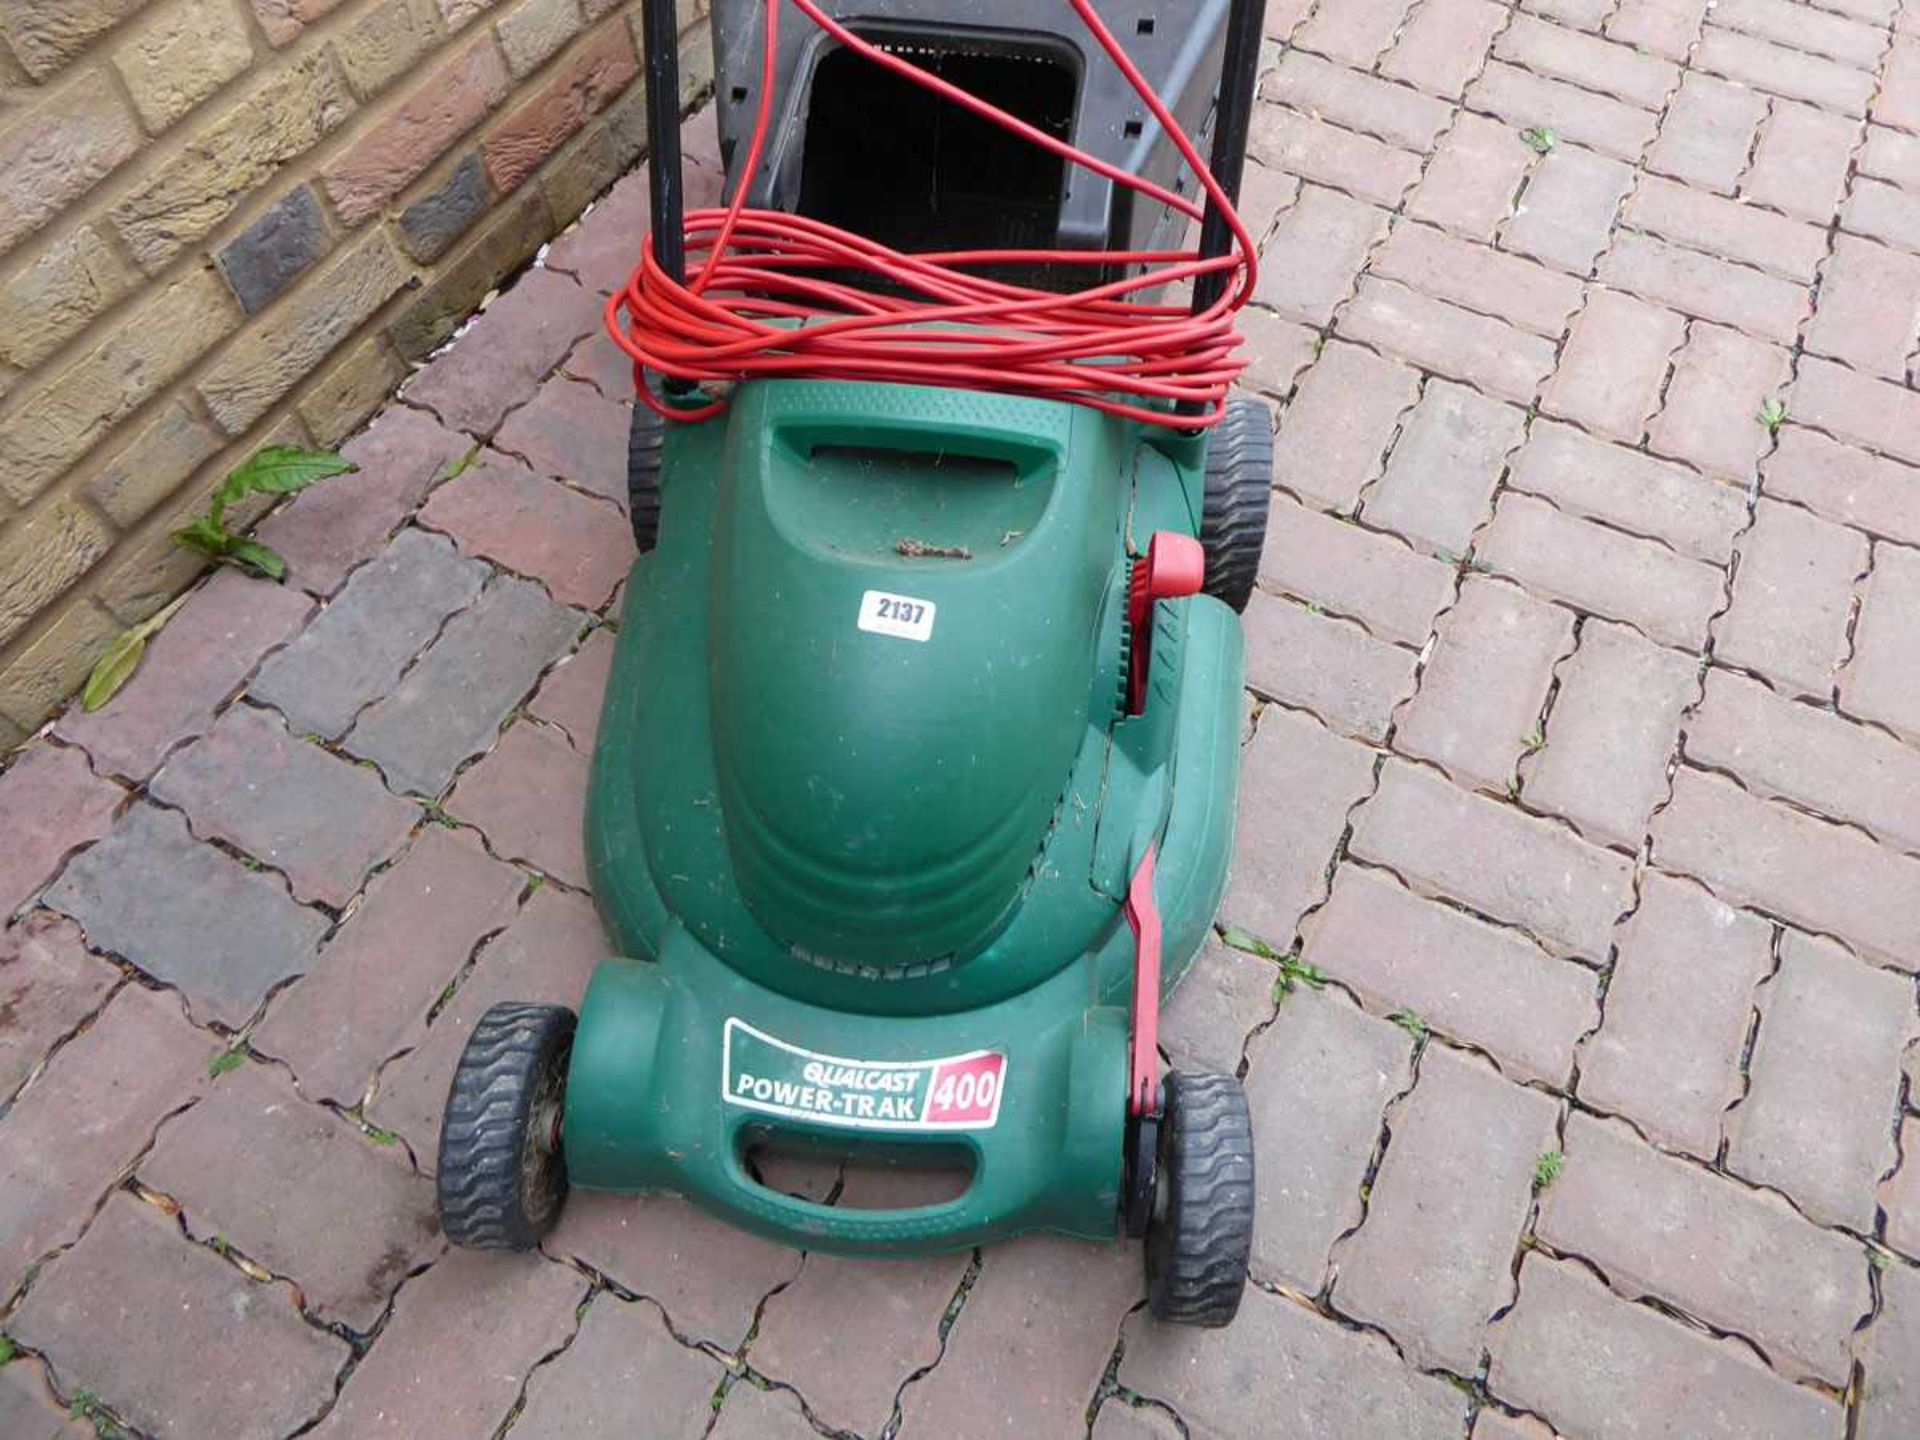 Qualcast electric lawnmower - Image 2 of 2